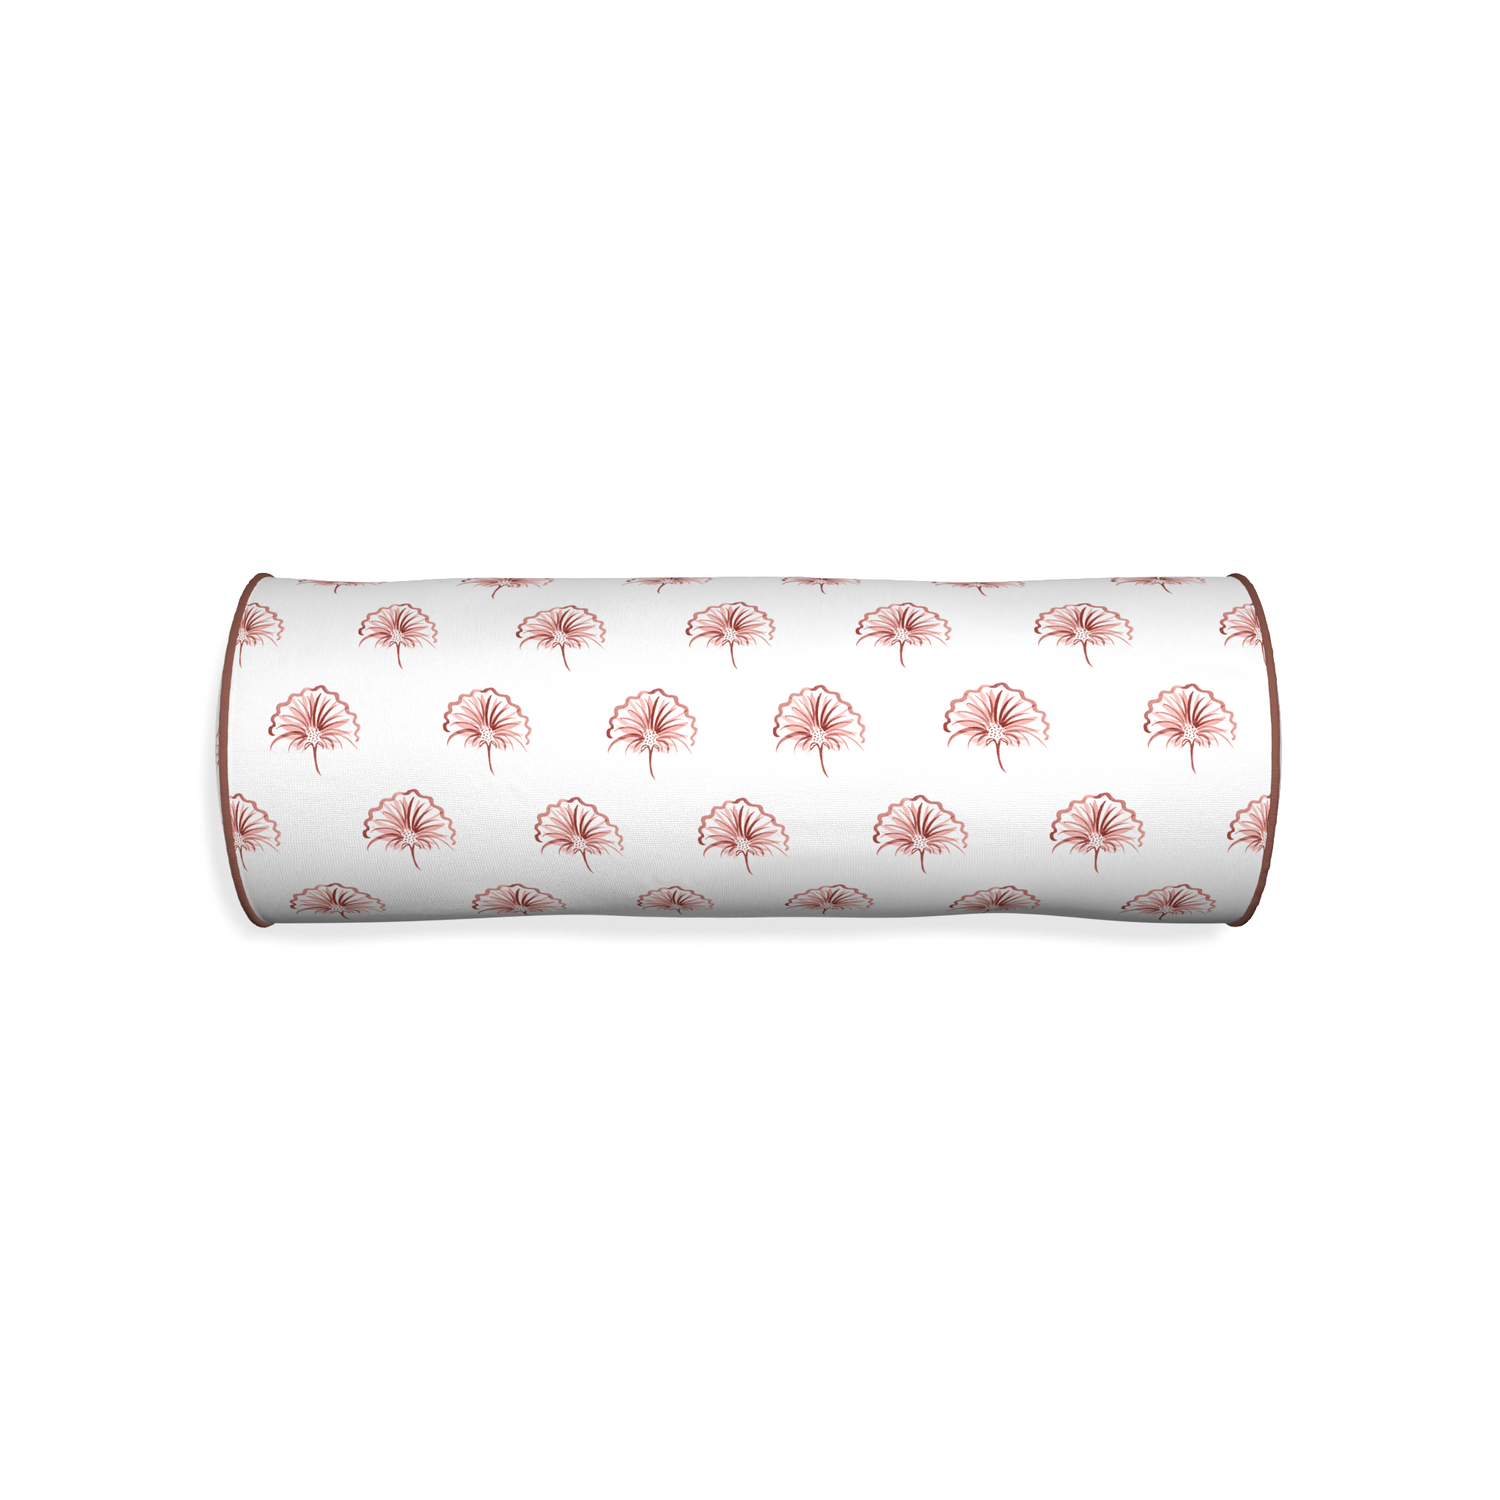 Bolster penelope rose custom floral pinkpillow with w piping on white background